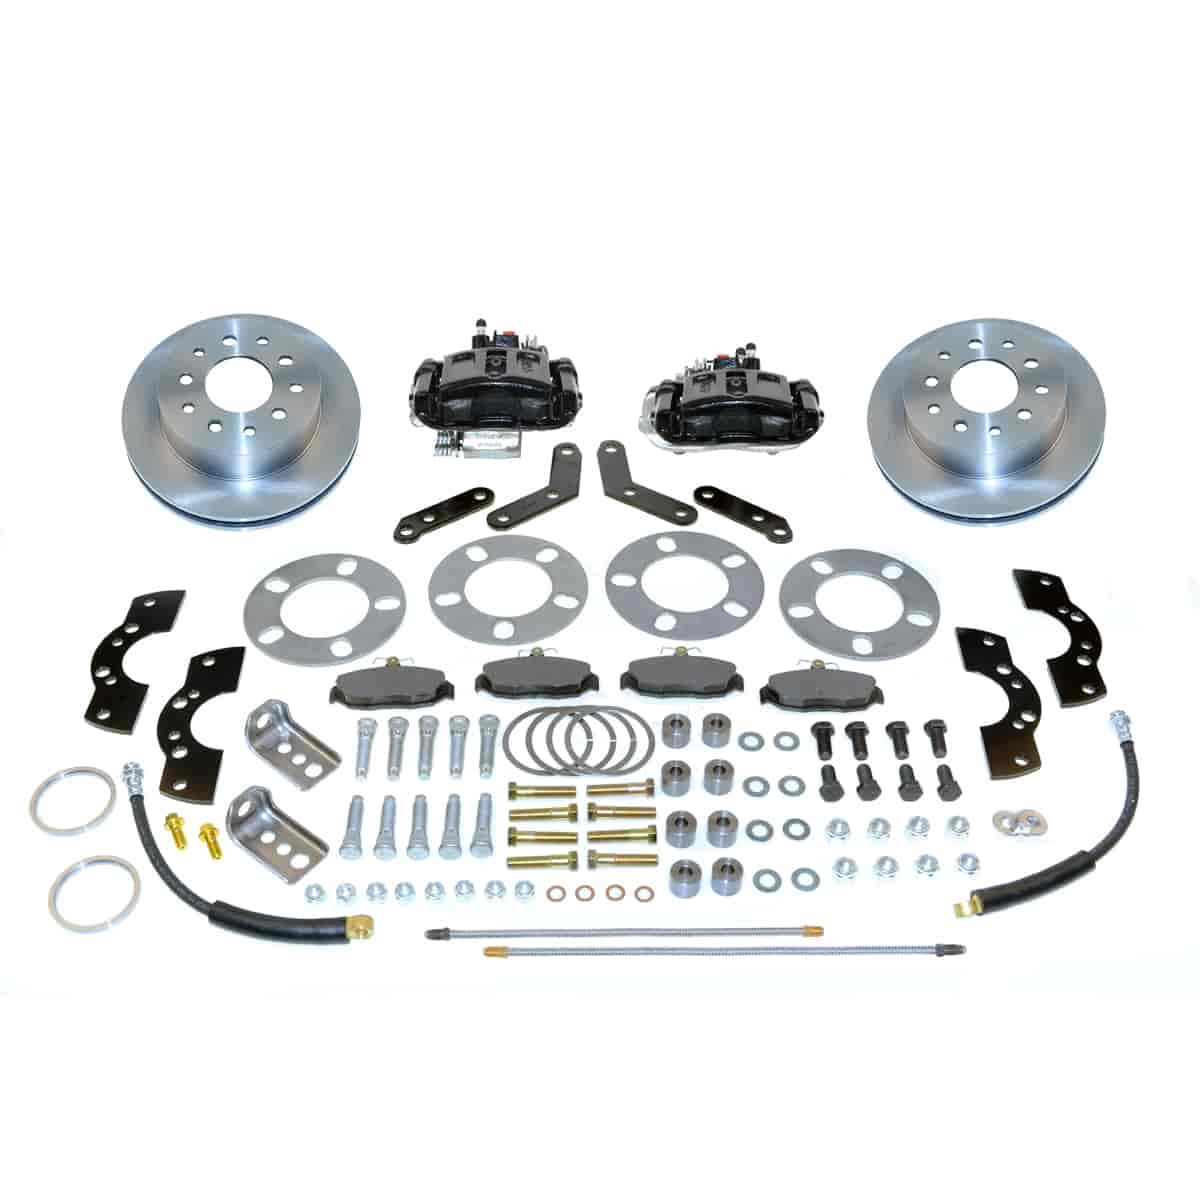 Single Piston Rear Disc Brake Conversion Kit For Ford 8" and 9" Small Bearing Rear Ends